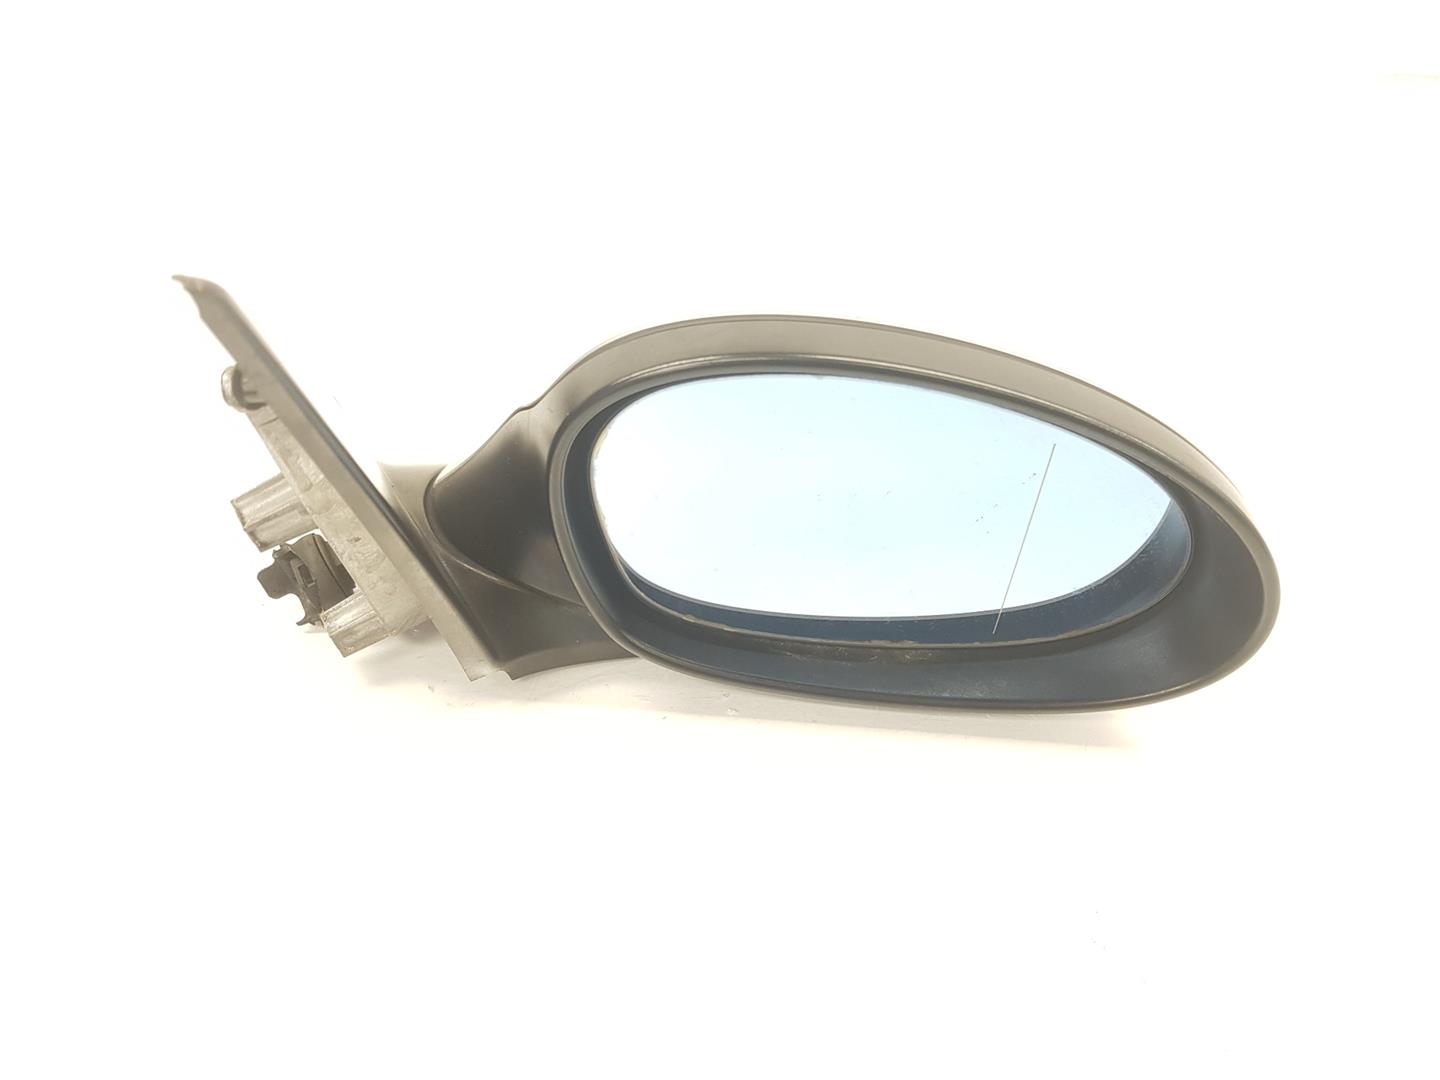 BMW 1 Series F20/F21 (2011-2020) Right Side Wing Mirror 51167189850, 51167189850, GRIS354 24205815